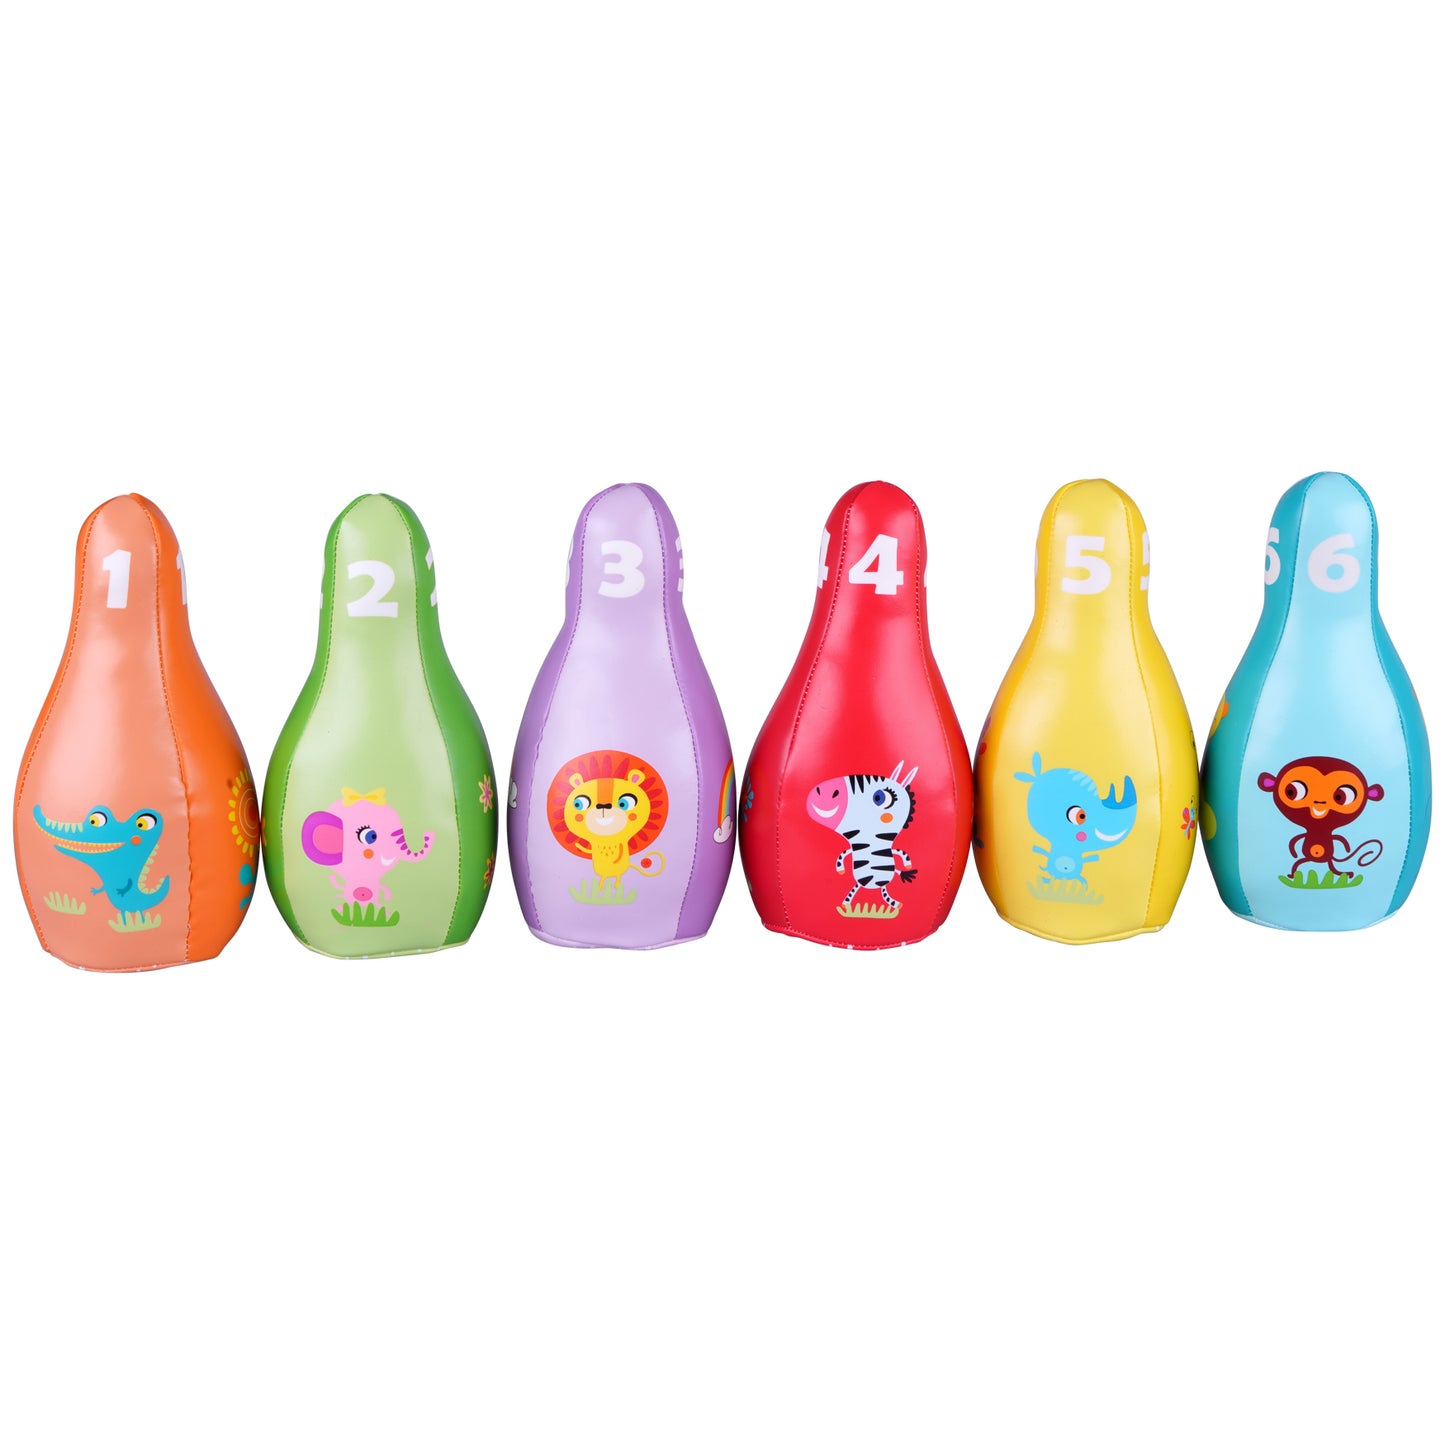 soft colorful bowling set with animal illustrations